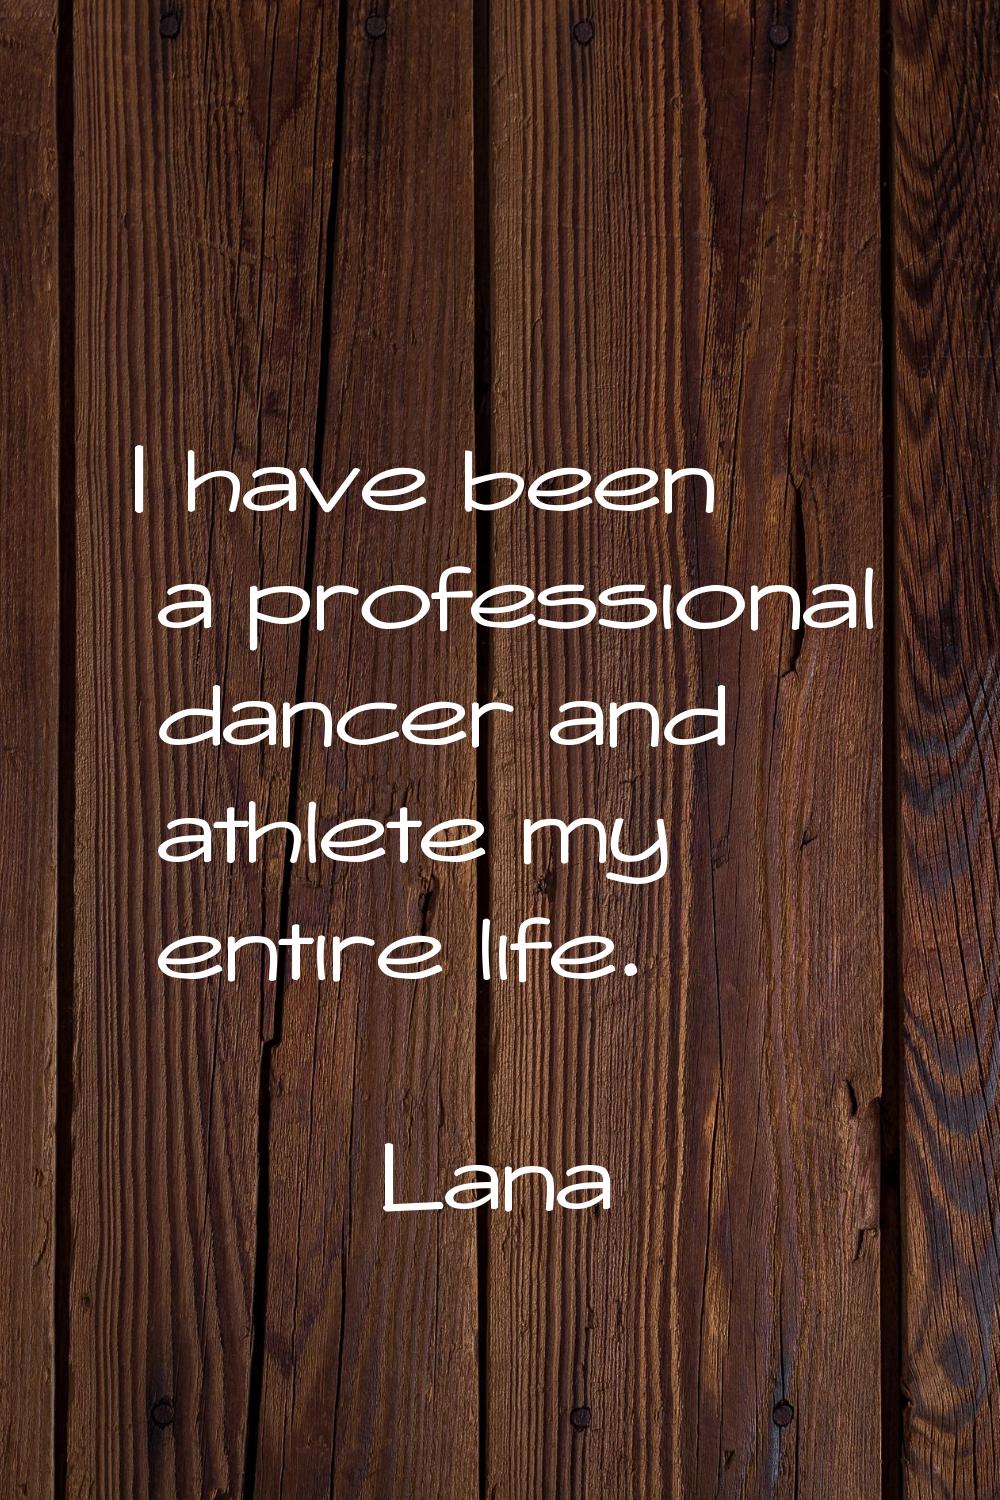 I have been a professional dancer and athlete my entire life.